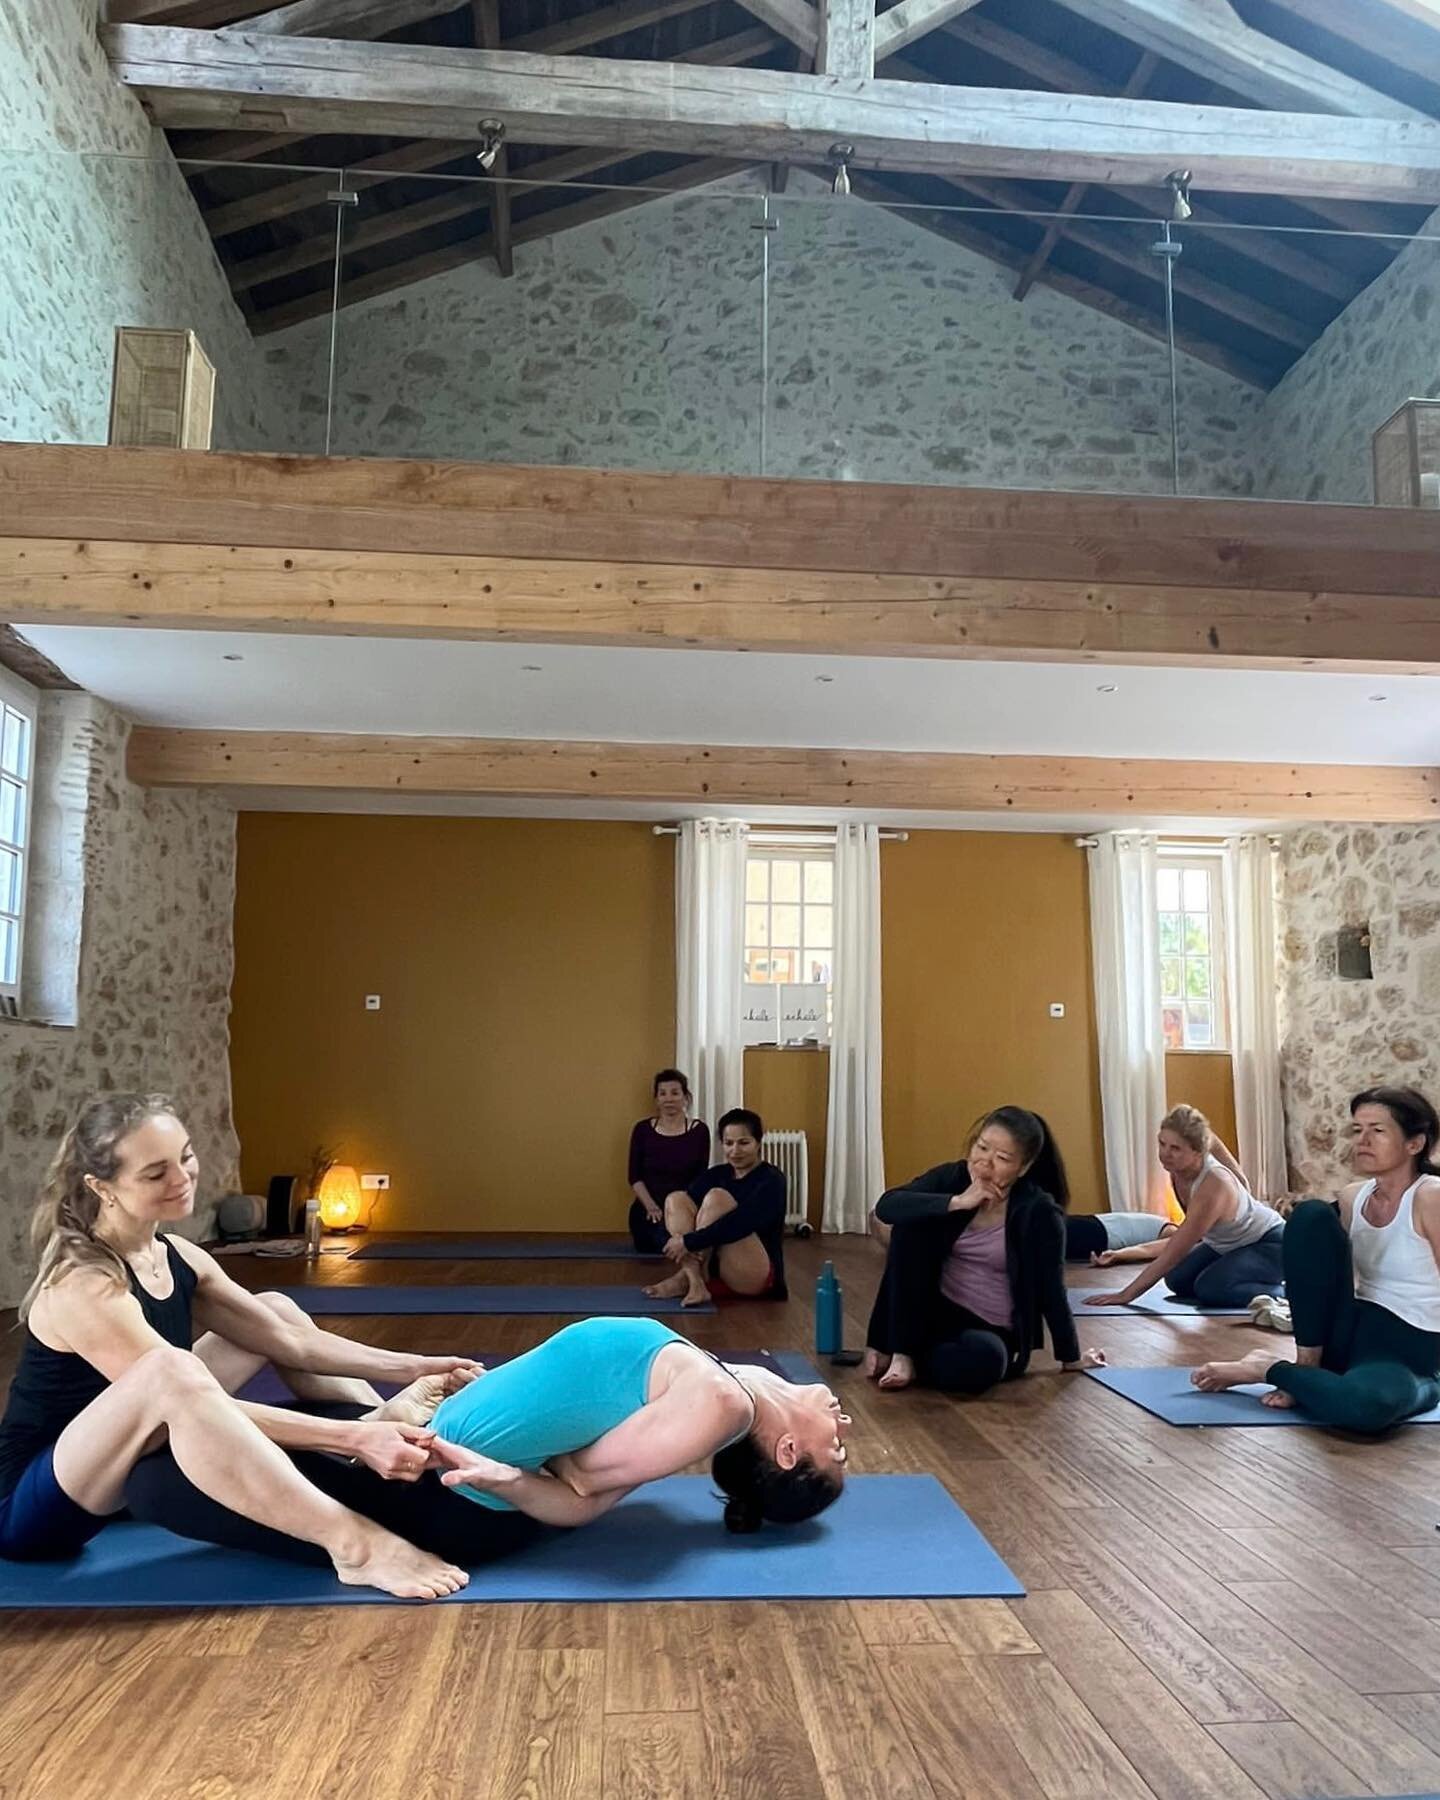 After hosting our first retreat, we just would like to say a big thank you to those that trusted and supported us. A special thank you to @philippaasher_ashtanganirvrta who has played an essential part on this, even when the shala was just a pile of 